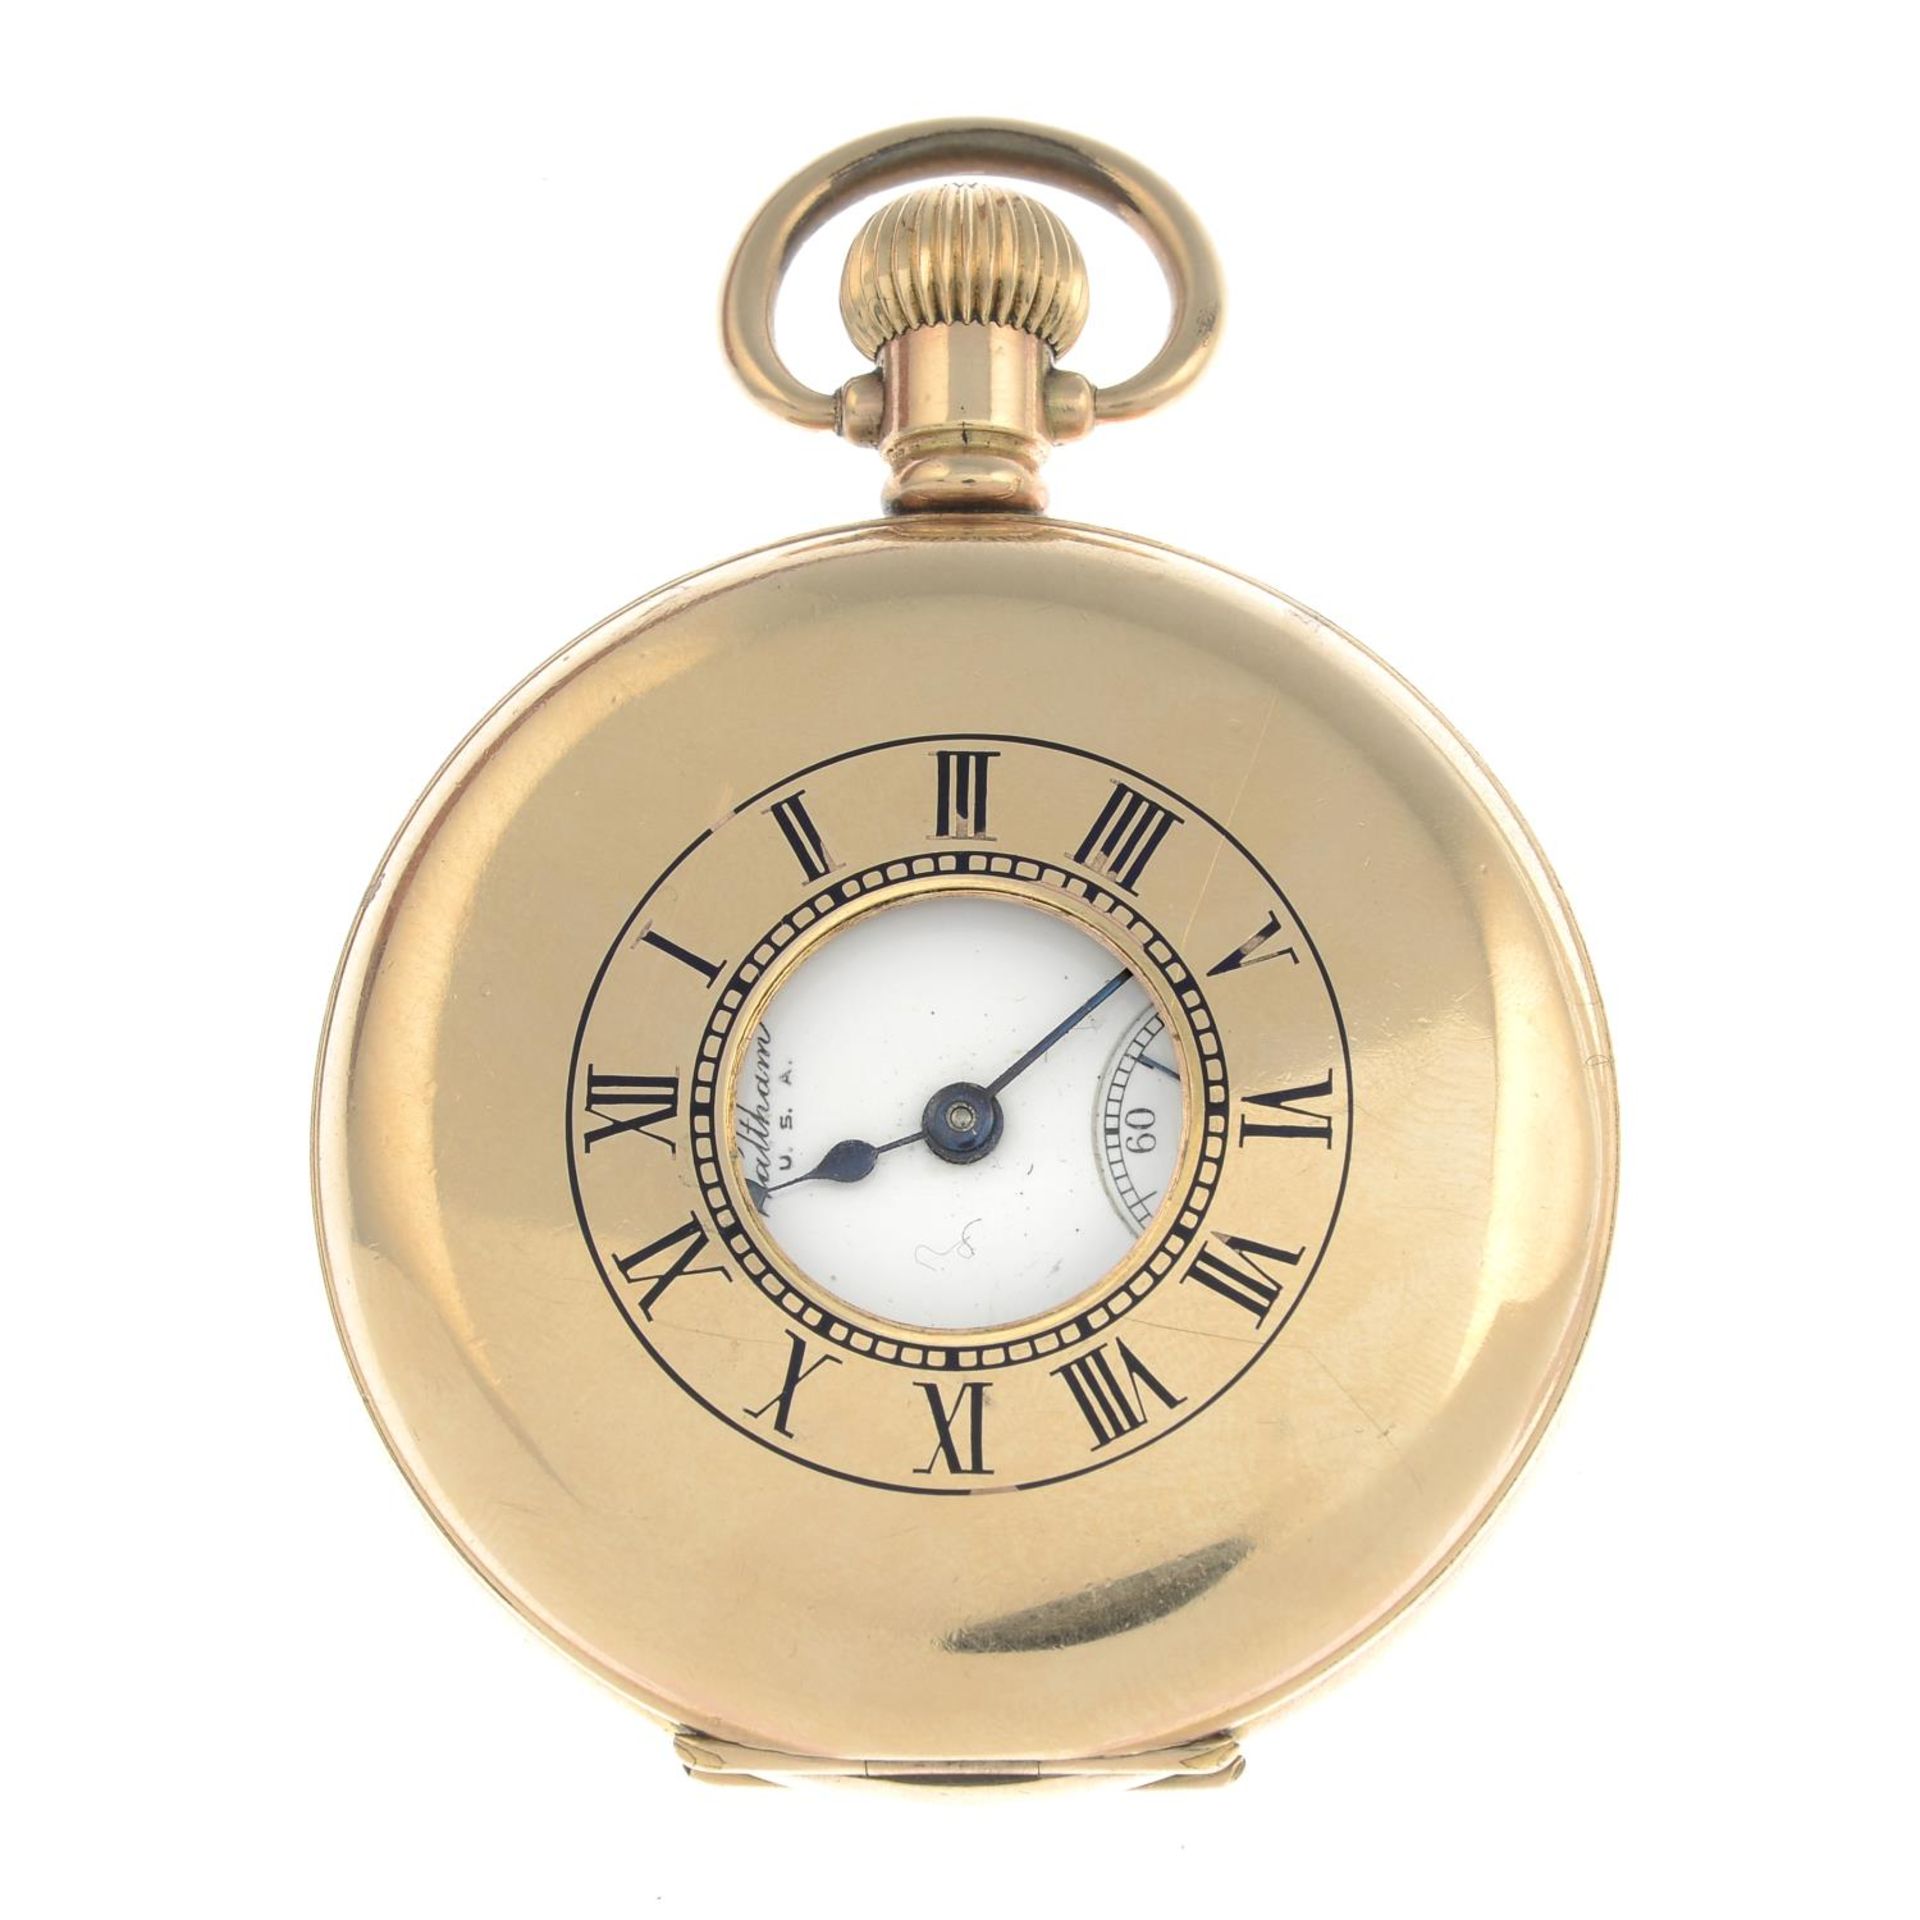 An early 20th century pocket watch, by Waltham.